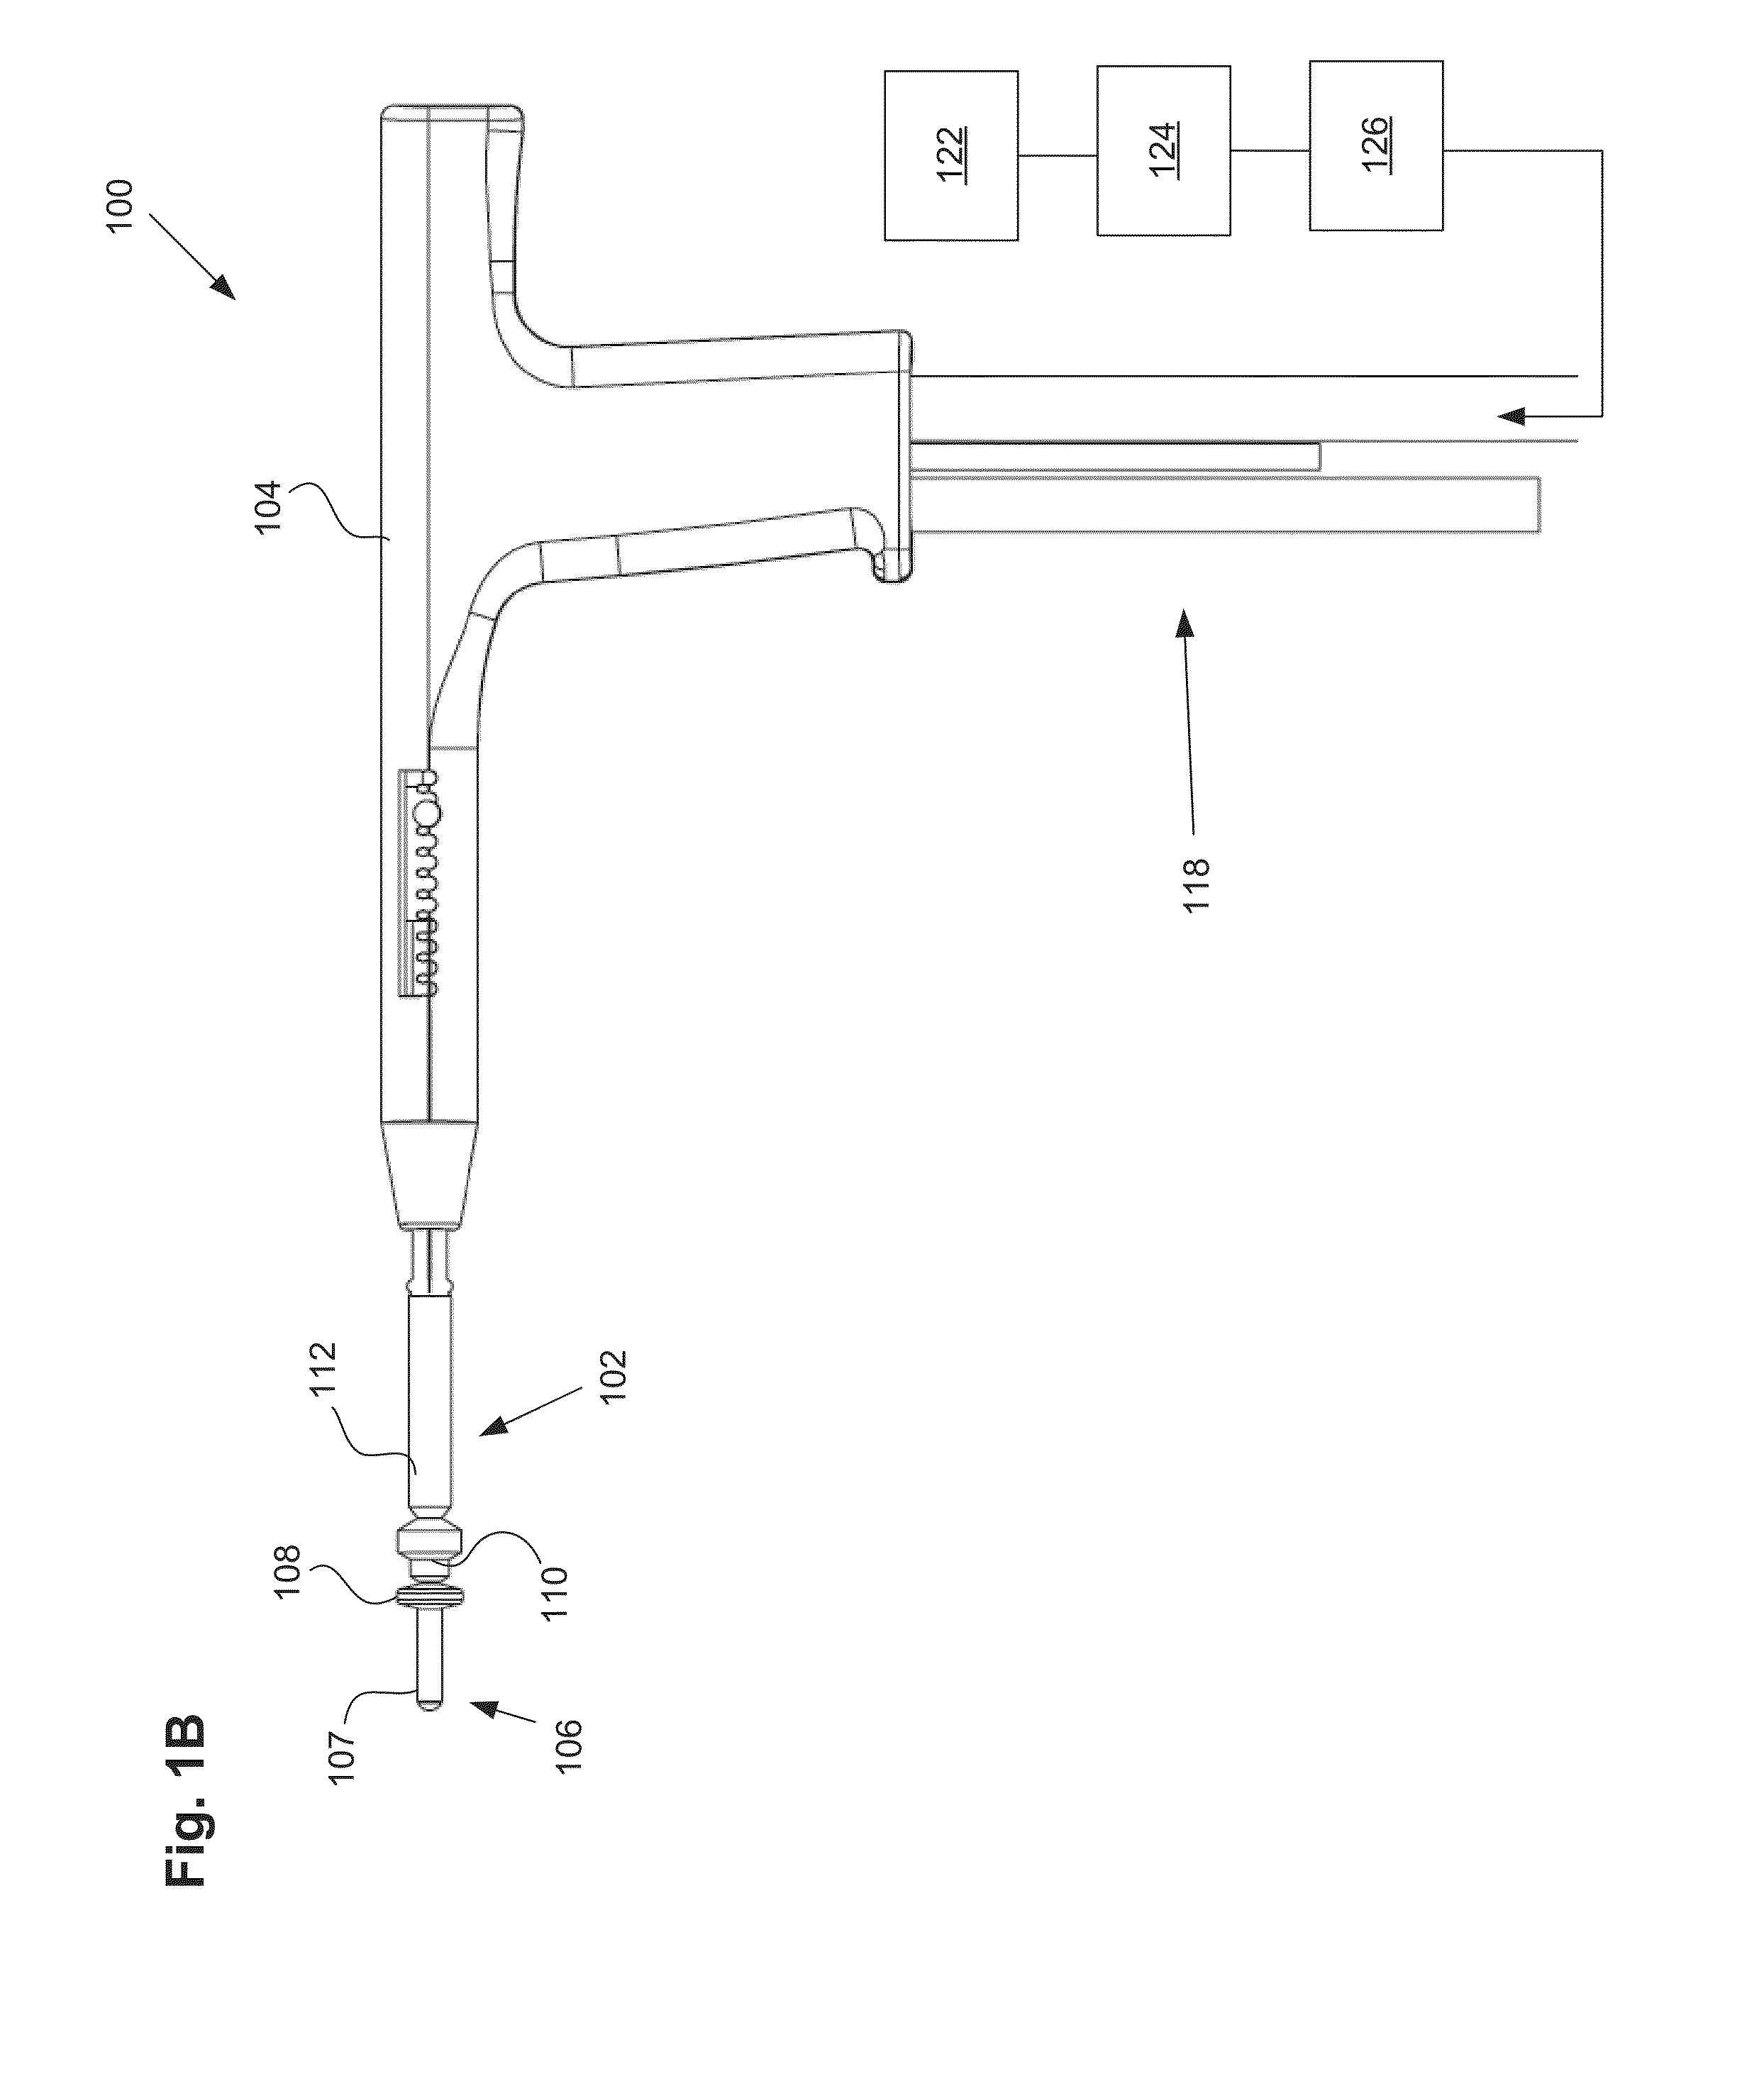 Integrity Testing Method and Apparatus for Delivering Vapor to the Uterus